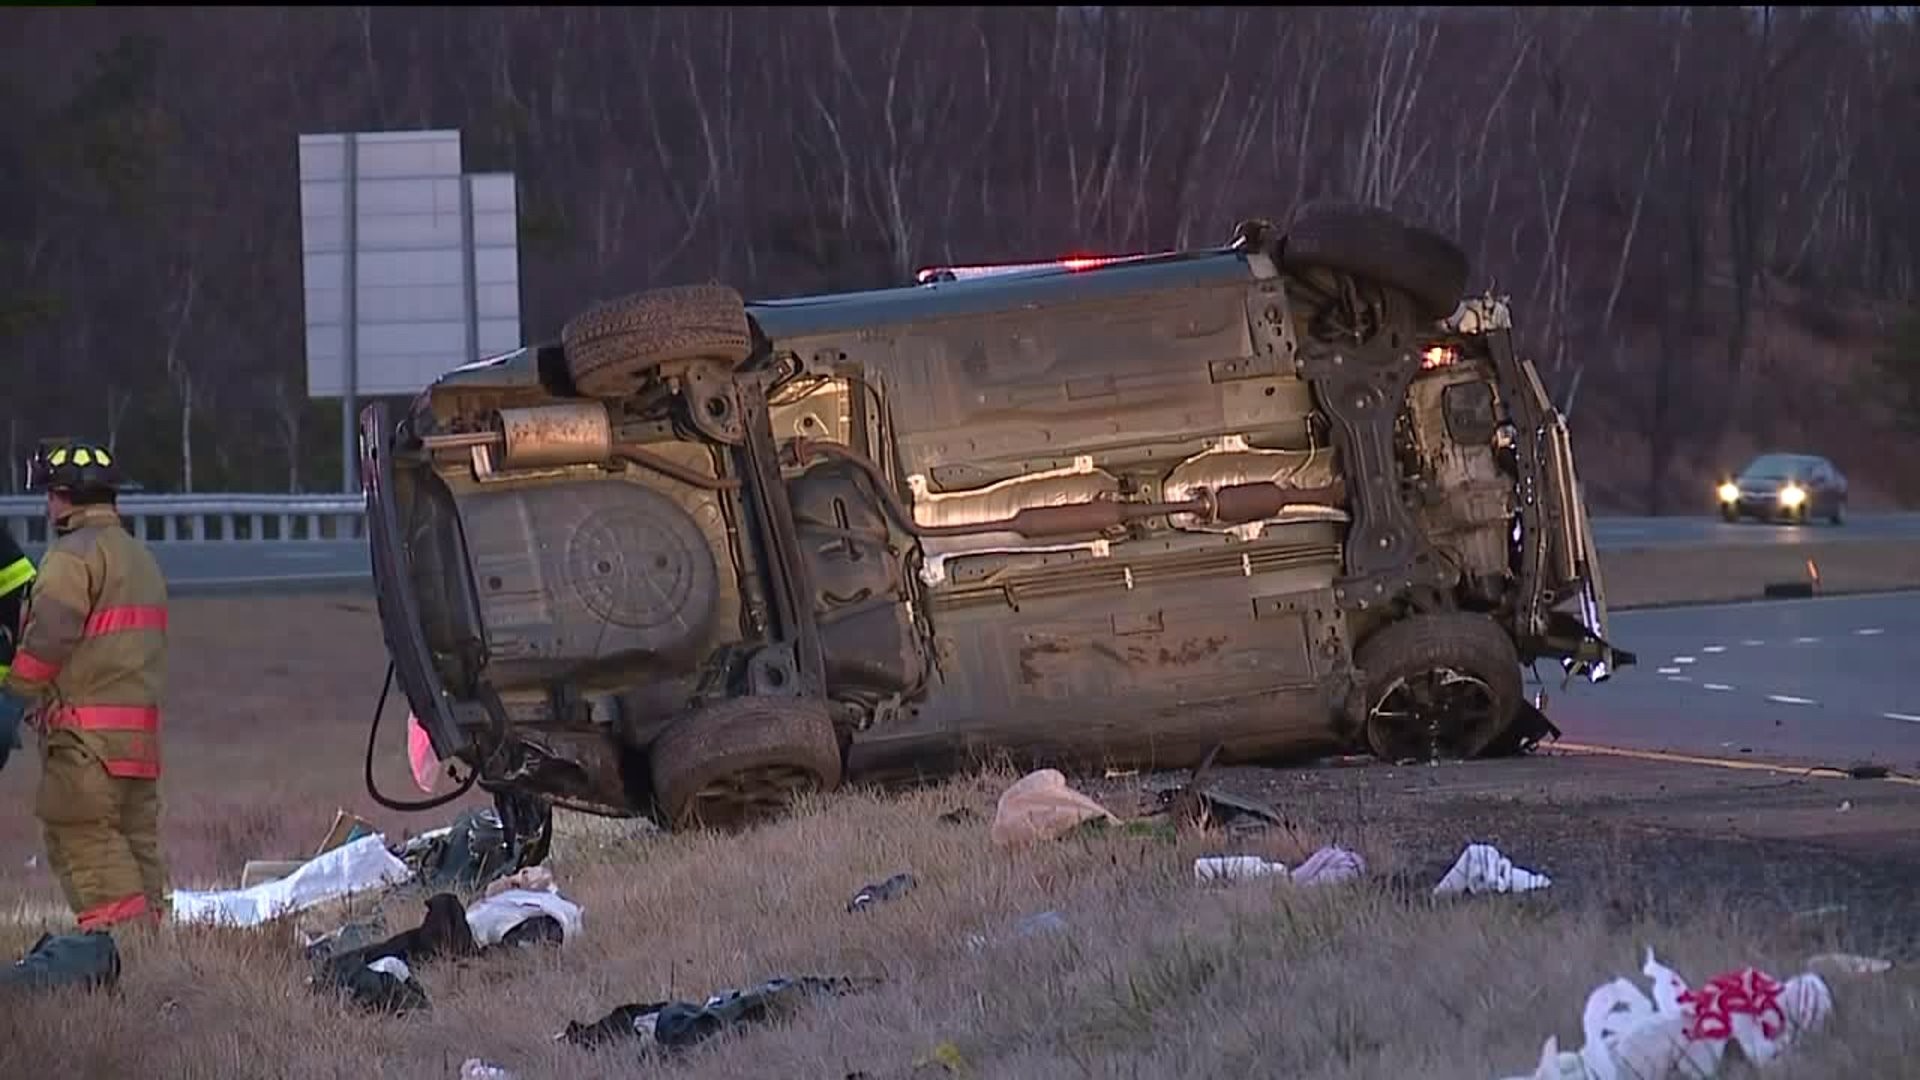 Driver Charged in Deadly Crash on I-81